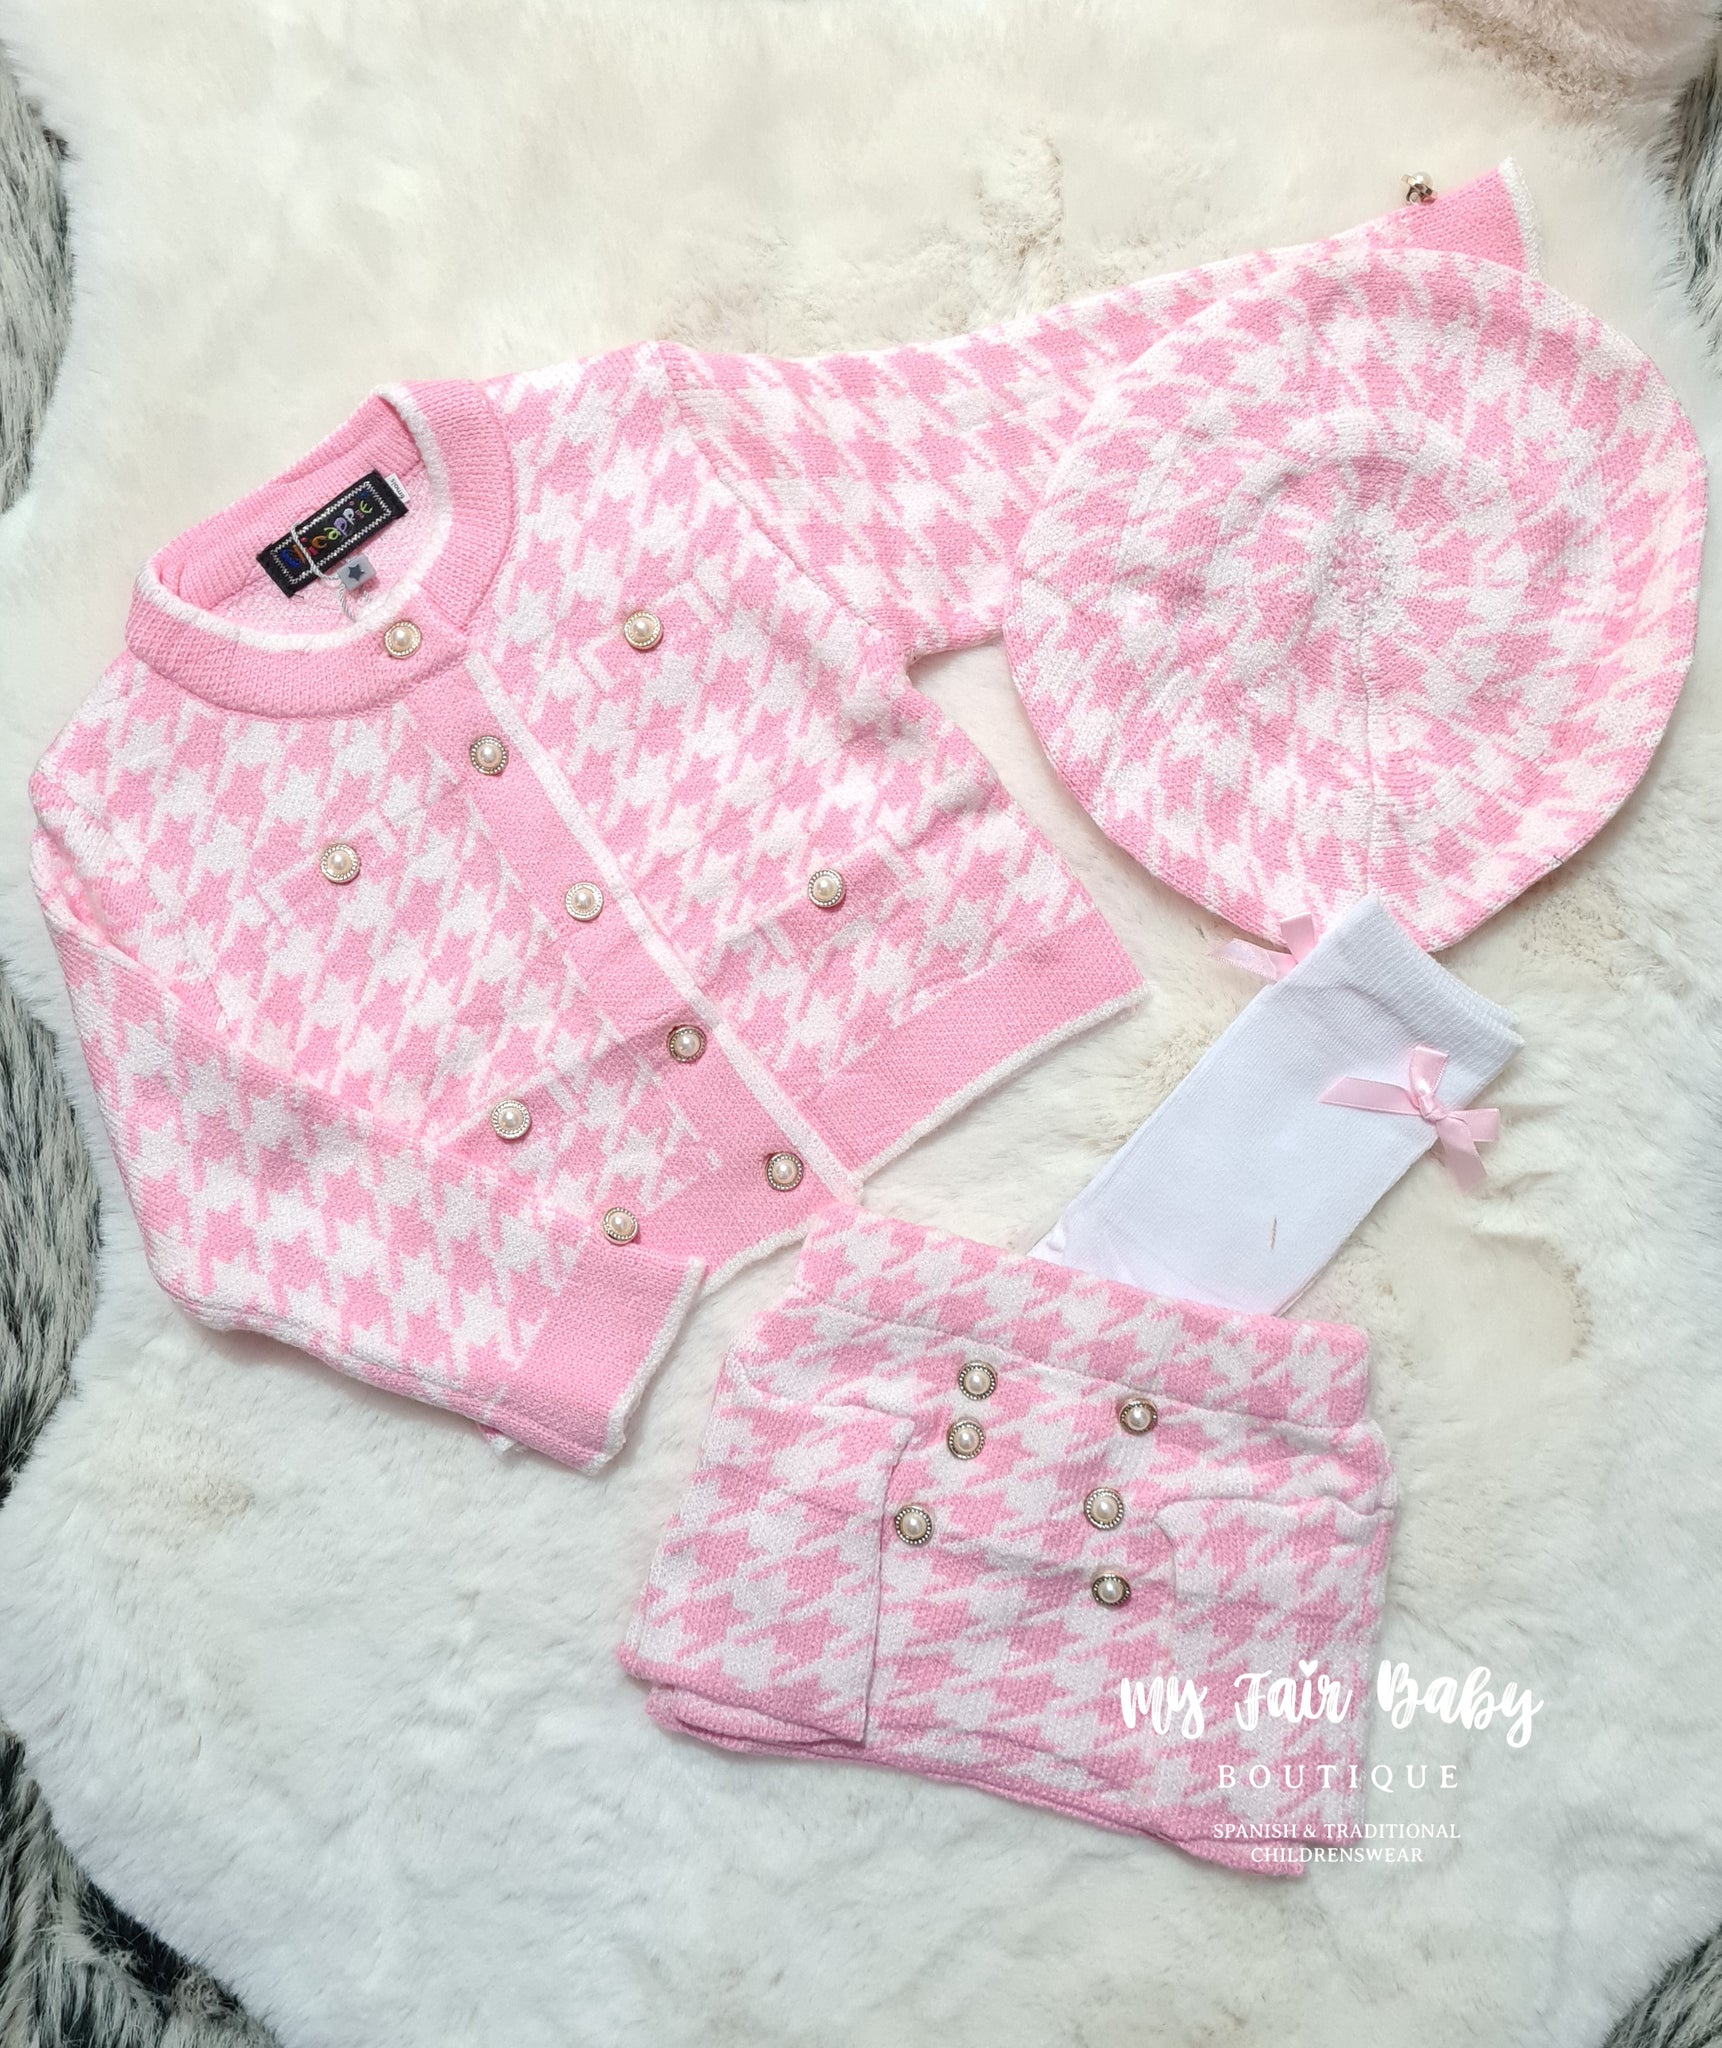 Traditional Baby Girls Pink & White 4PC Knitted Skirt & Jacket Set